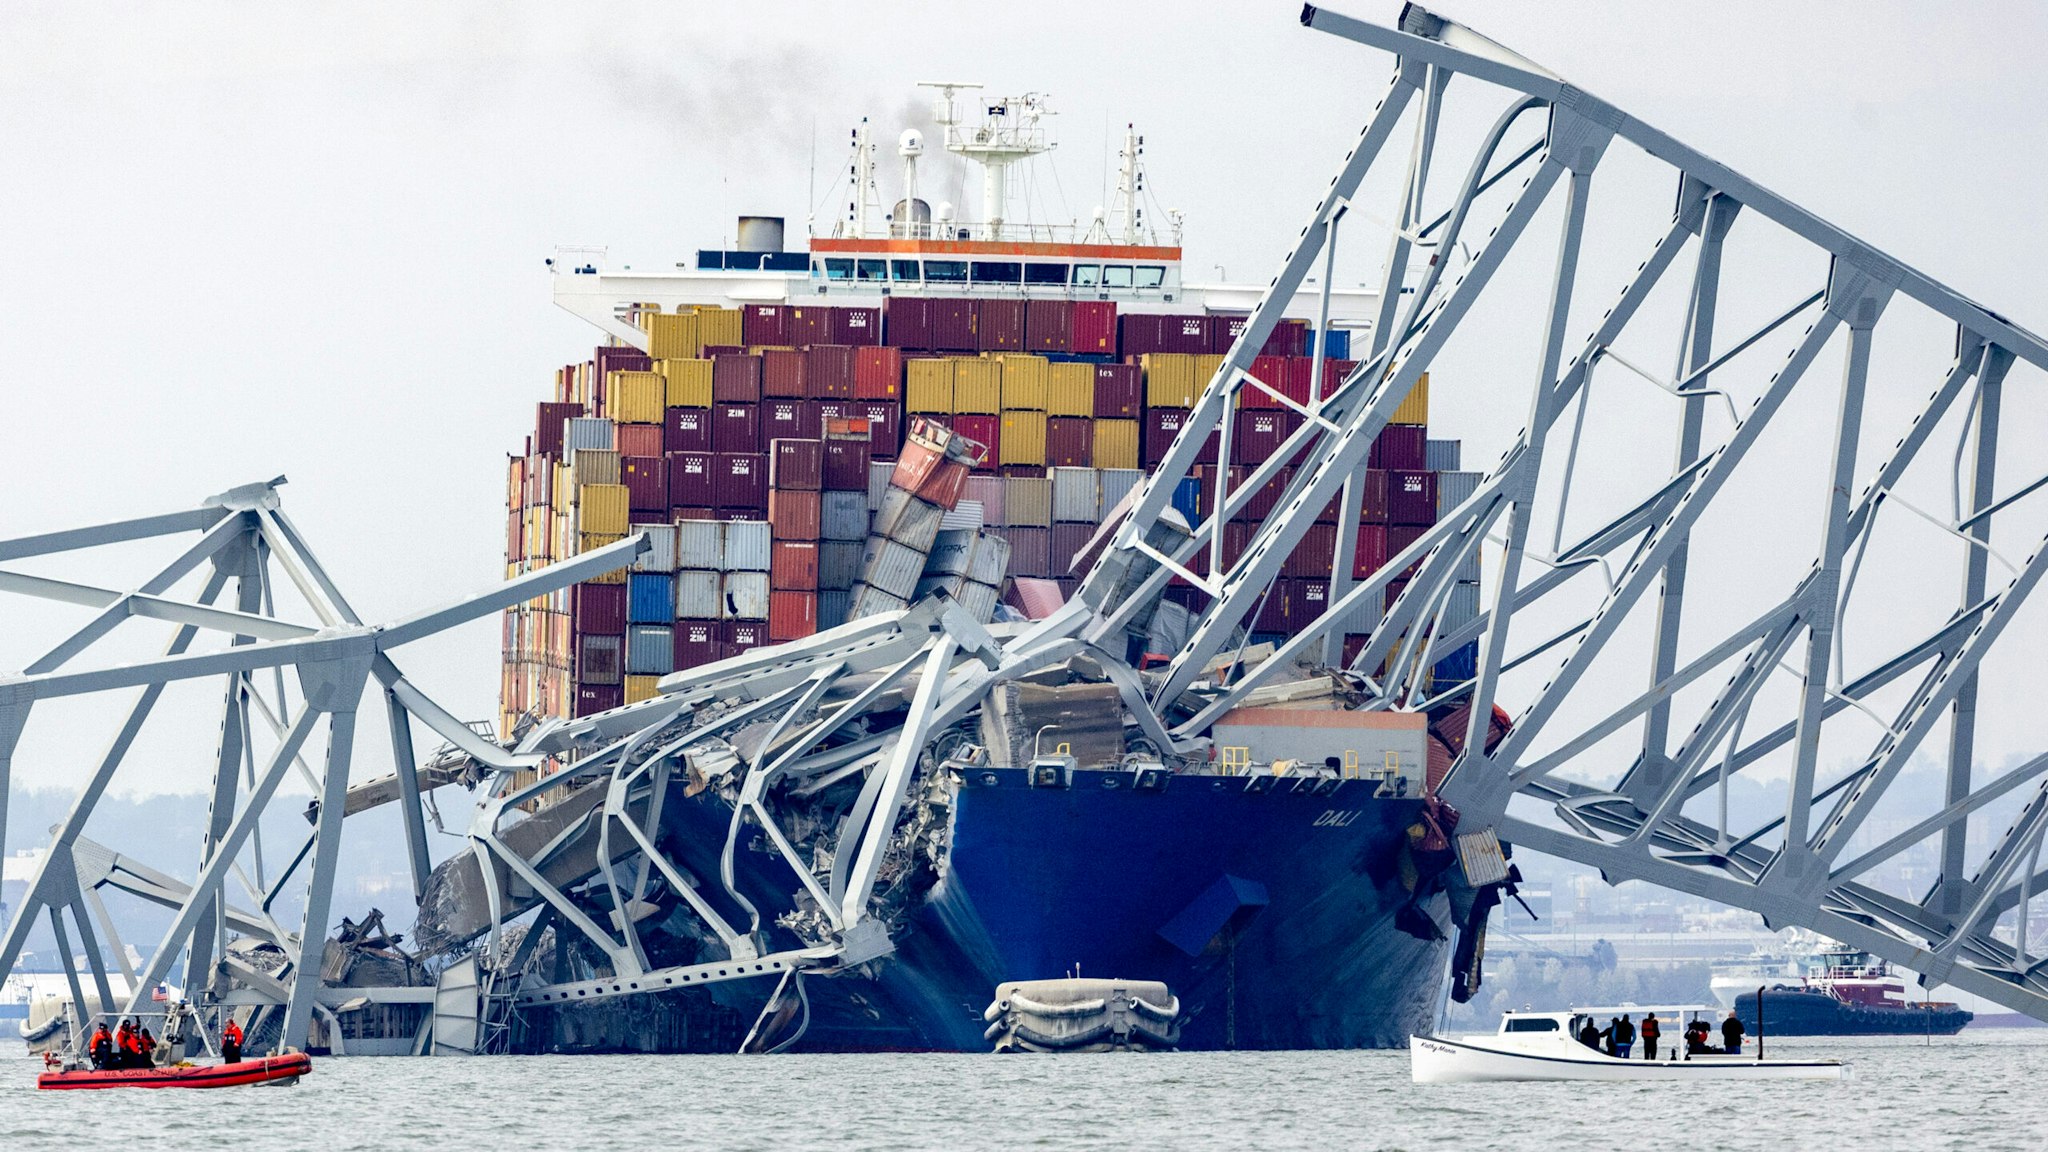 BALTIMORE, MARYLAND - MARCH 26: The cargo ship Dali sits in the water after running into and collapsing the Francis Scott Key Bridge on March 26, 2024 in Baltimore, Maryland. According to reports, rescuers are still searching for multiple people, while two survivors have been pulled from the Patapsco River. A work crew was fixing potholes on the bridge, which is used by roughly 30,000 people each day, when the ship struck at around 1:30am on Tuesday morning. The accident has temporarily closed the Port of Baltimore, one of the largest and busiest on the East Coast of the U.S.